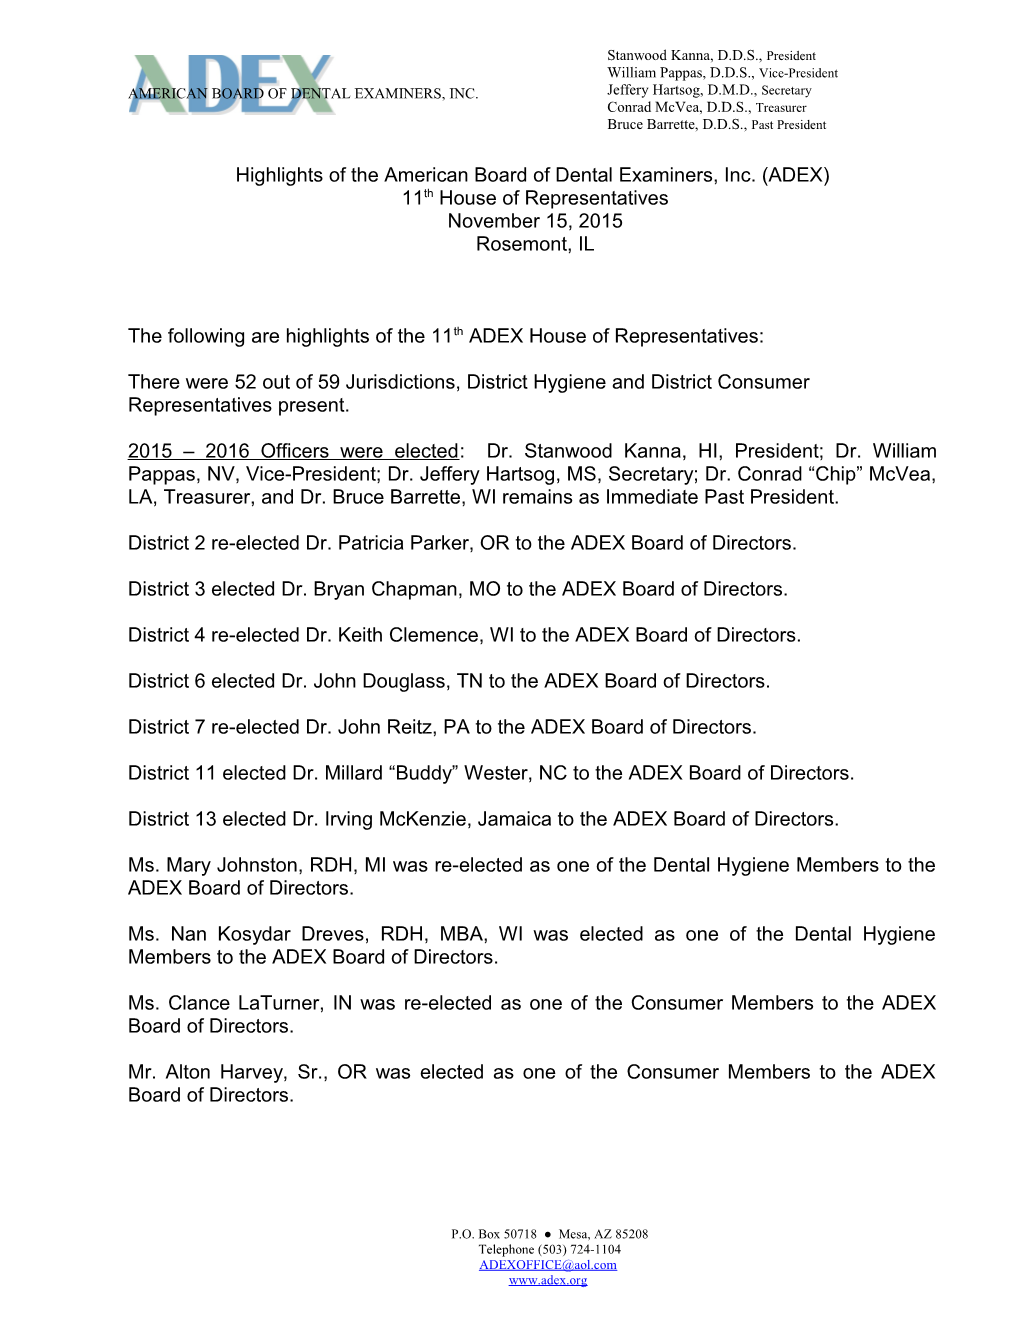 Highlights of the American Board of Dental Examiners, Inc. (ADEX)